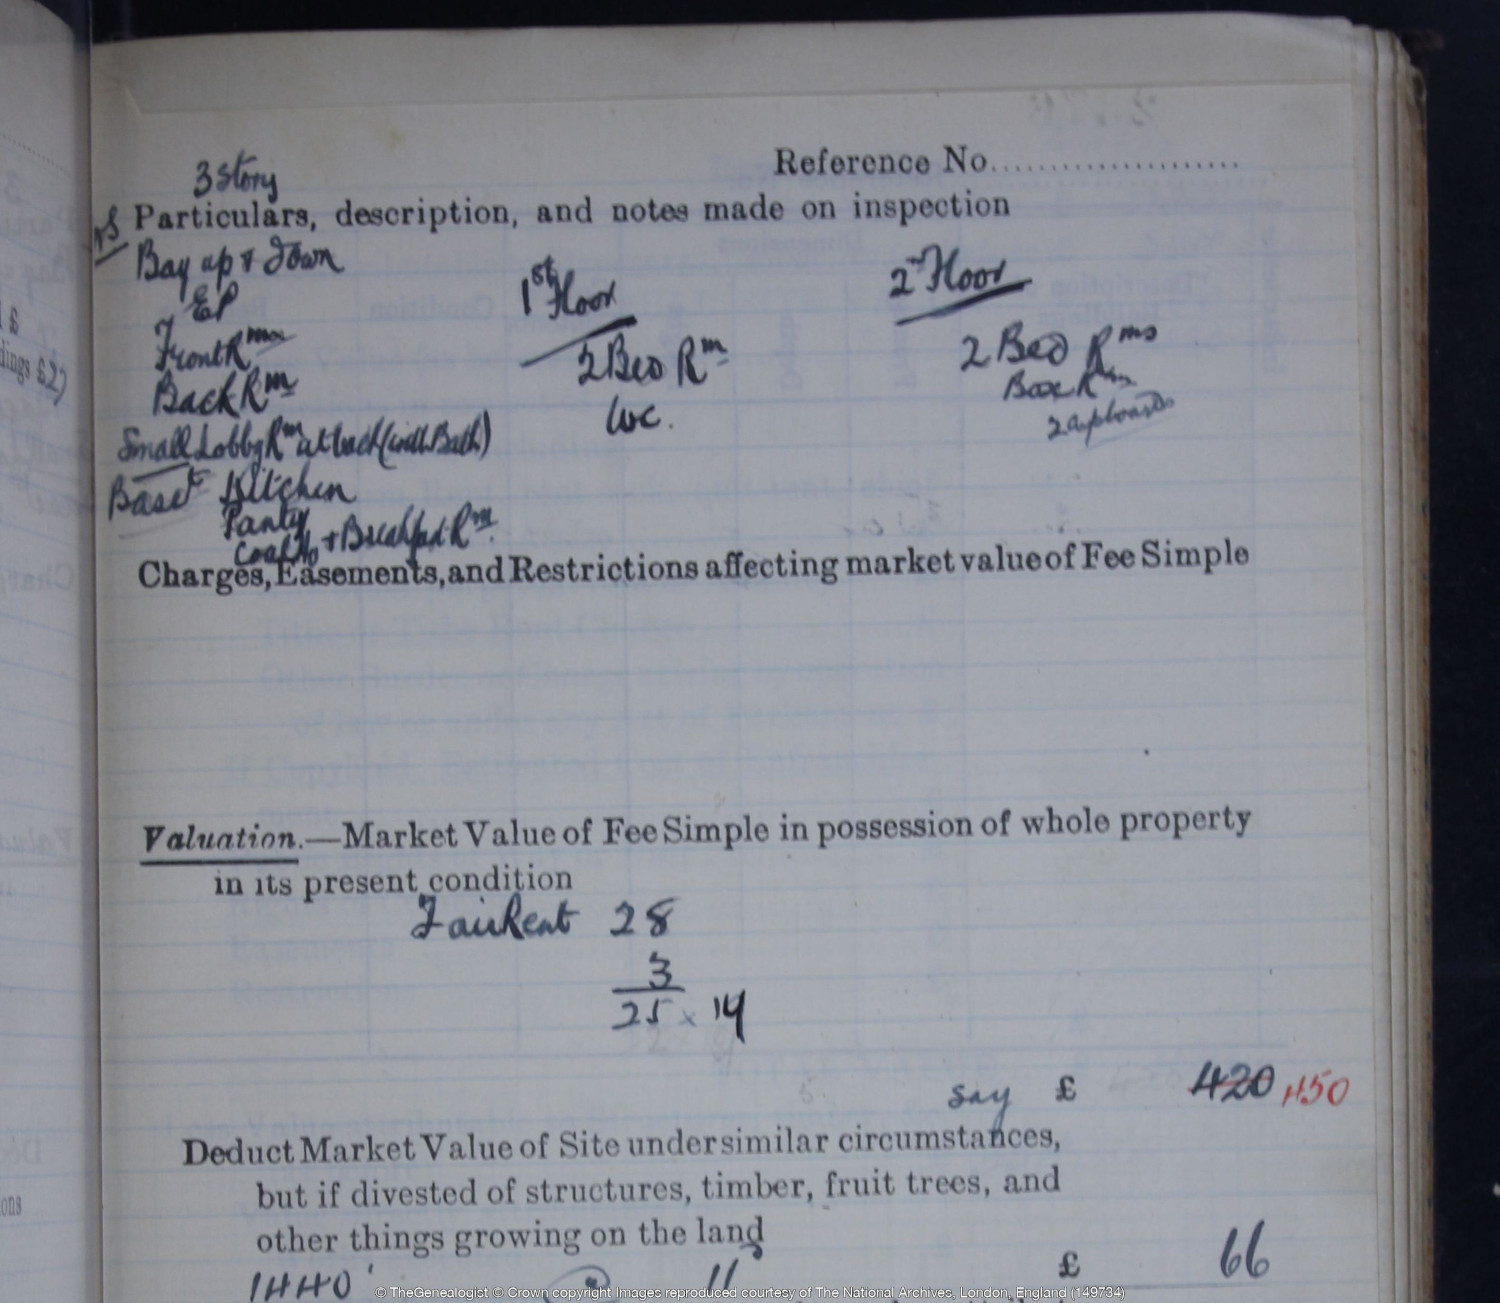 IR58 Field Books provide particulars and description of similar properties on this road